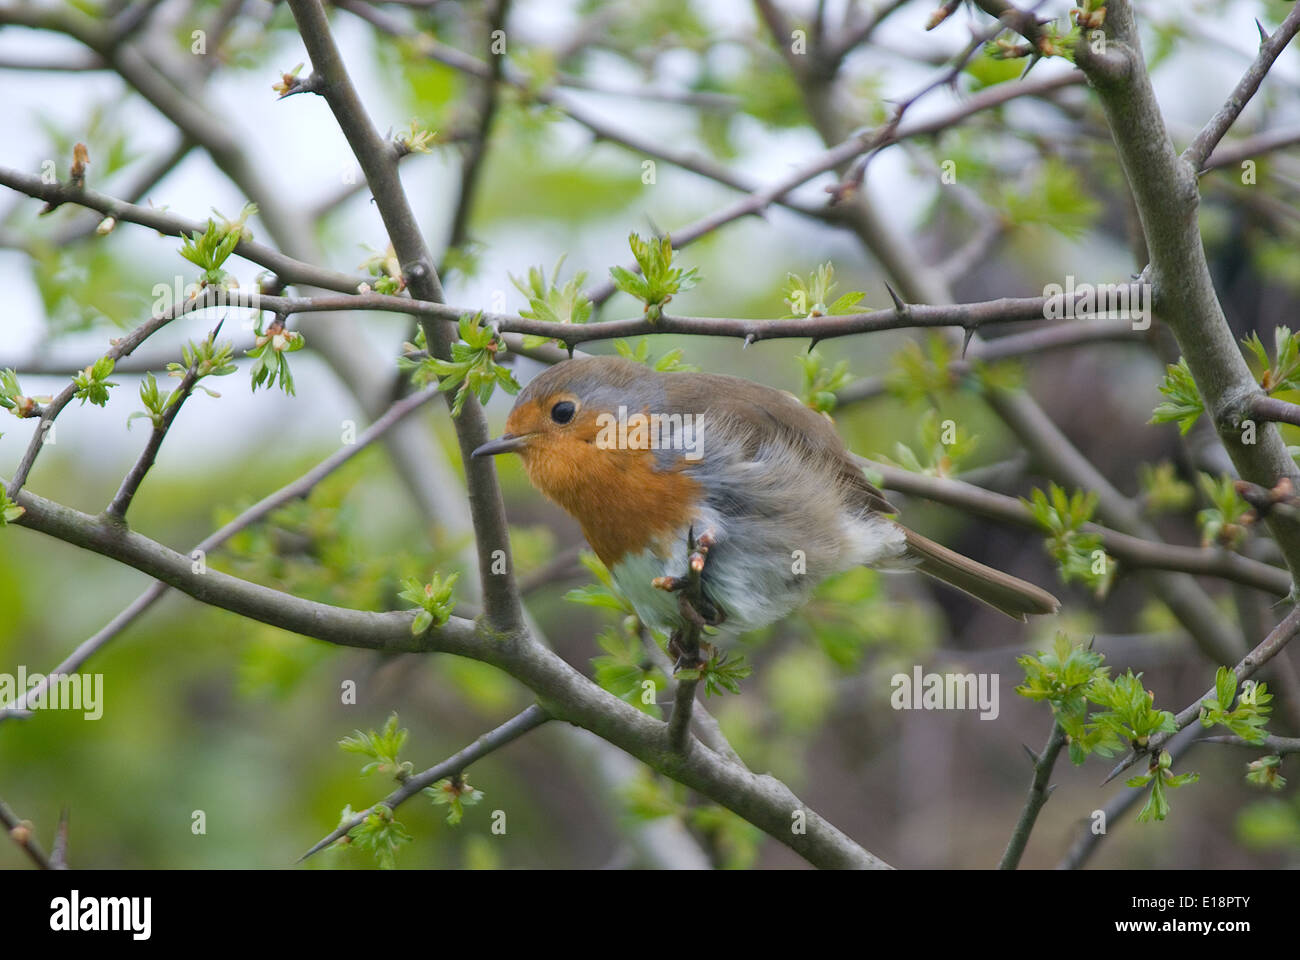 Robin hunting from perch in Hawthorn tree. Stock Photo